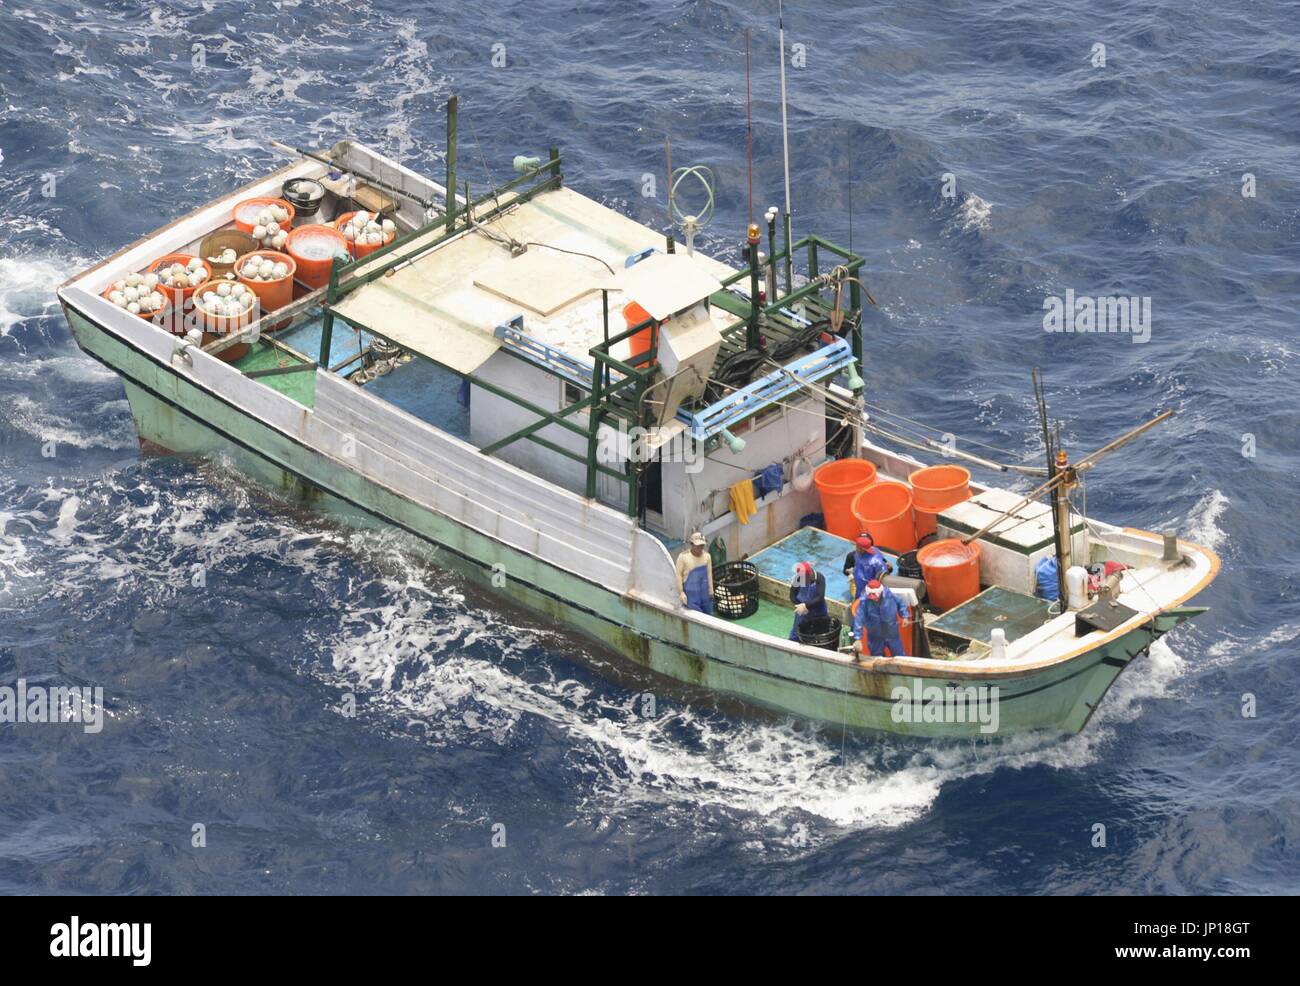 ISHIGAKI, Japan - Aerial photo taken by Kyodo News shows a Taiwanese fishing boat operating in waters north of Ishigaki Island, Okinawa Prefecture, on May 10, 2013. A bilateral fishery agreement came into force the same day allowing Taiwanese fishing boats to operate in Japan's 200-nautical-mile exclusive economic zone near the Senkaku Islands in the East China Sea. (Kyodo) Stock Photo